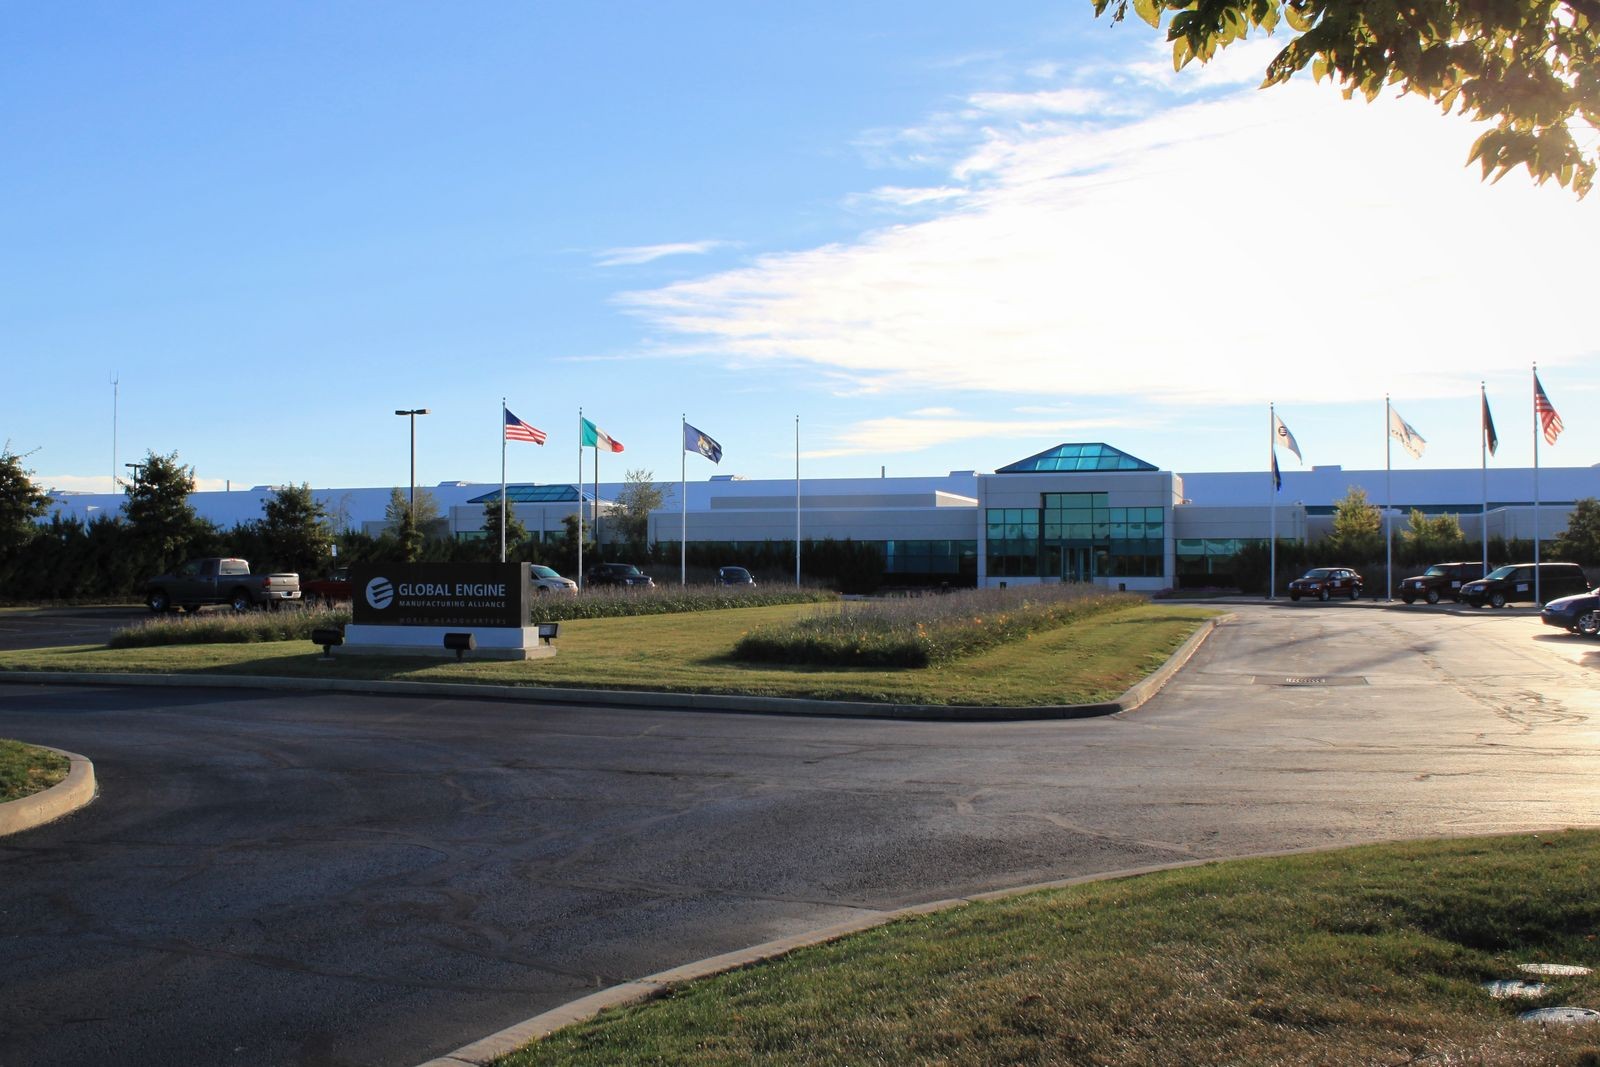 Global Engine Manufacturing Alliance World Headquarters Building, 5800 Ann Arbor Road, Dundee, Michigan